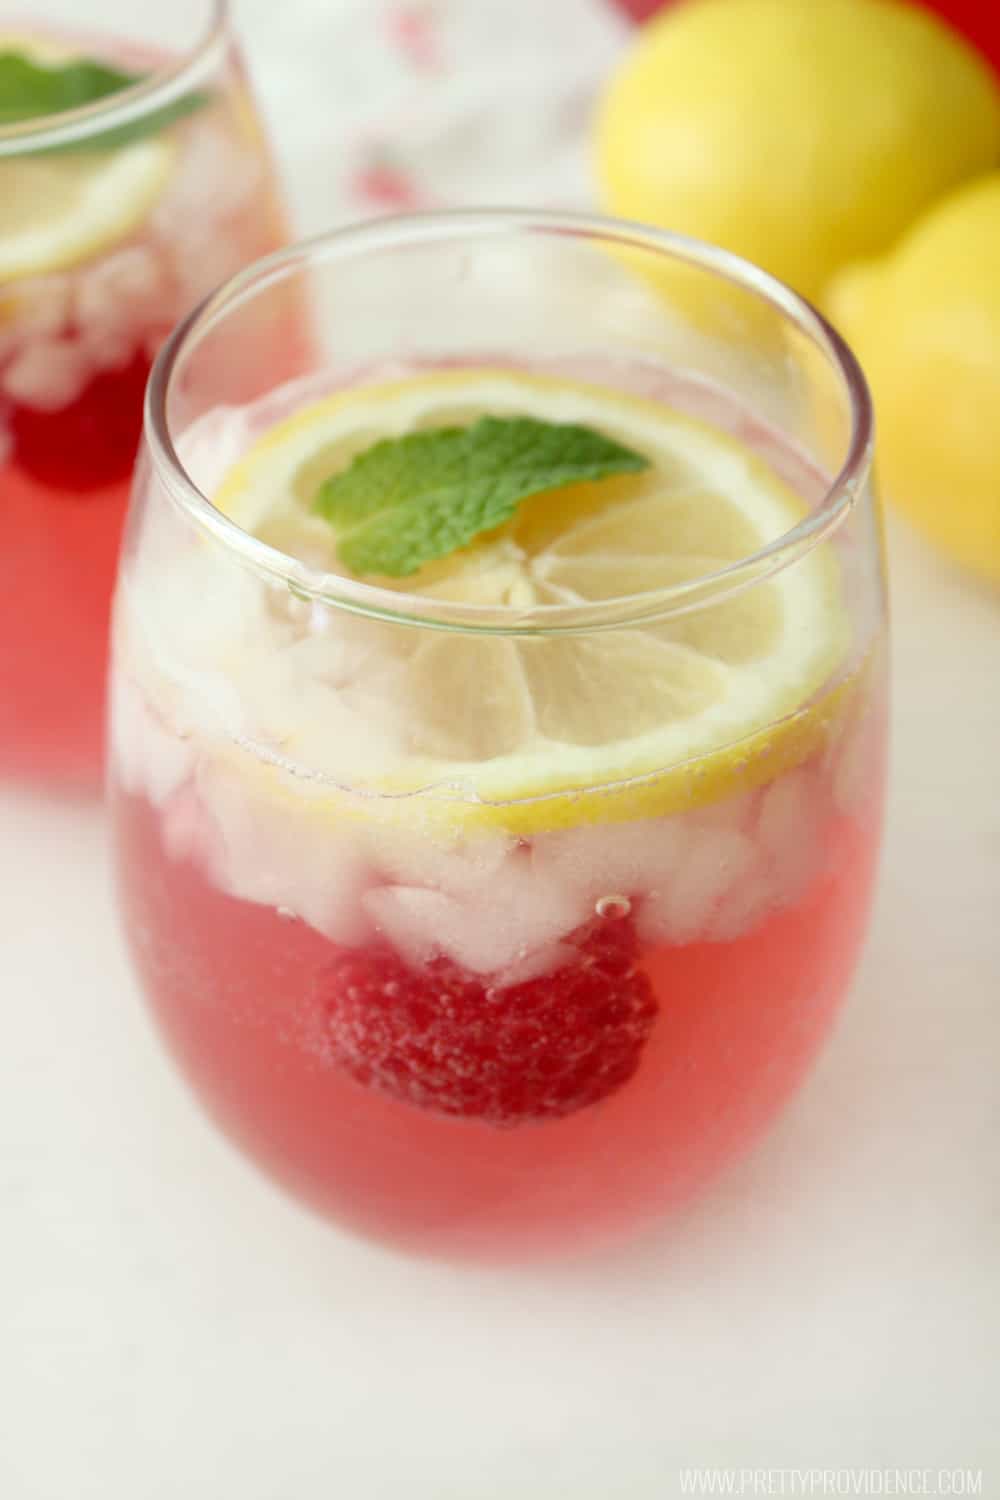 Glass of raspberry lemonade with a slice of lemon and leaf of mint